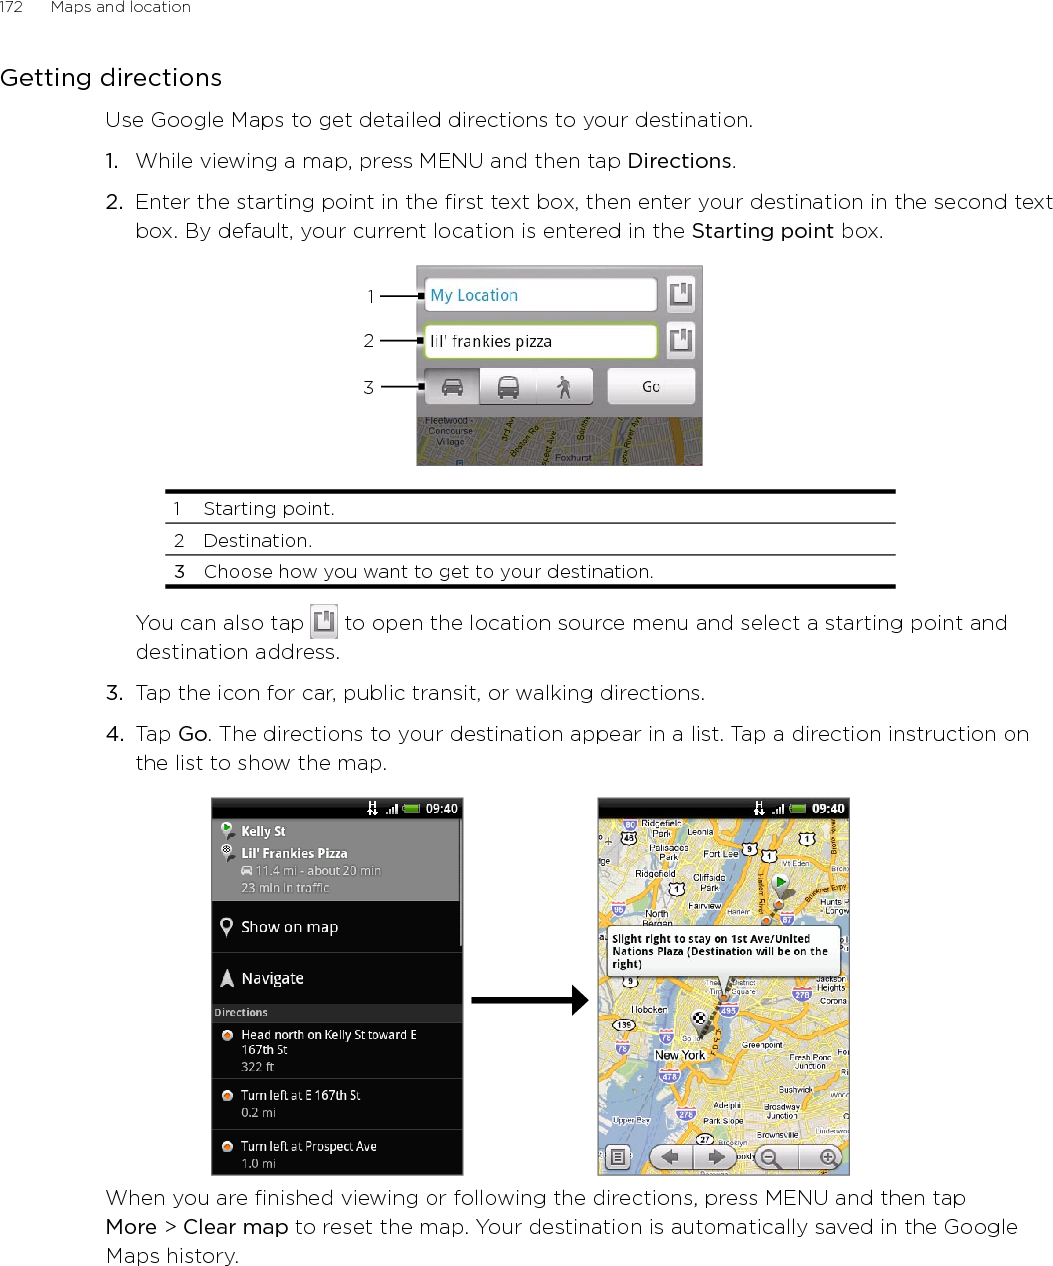 172      Maps and location      Getting directionsUse Google Maps to get detailed directions to your destination.While viewing a map, press MENU and then tap Directions.Enter the starting point in the first text box, then enter your destination in the second text box. By default, your current location is entered in the Starting point box.3121  Starting point. 2  Destination.3  Choose how you want to get to your destination.You can also tap   to open the location source menu and select a starting point and destination address.3.  Tap the icon for car, public transit, or walking directions.4.  Tap Go. The directions to your destination appear in a list. Tap a direction instruction on the list to show the map. When you are finished viewing or following the directions, press MENU and then tap More &gt; Clear map to reset the map. Your destination is automatically saved in the Google Maps history.1.2.